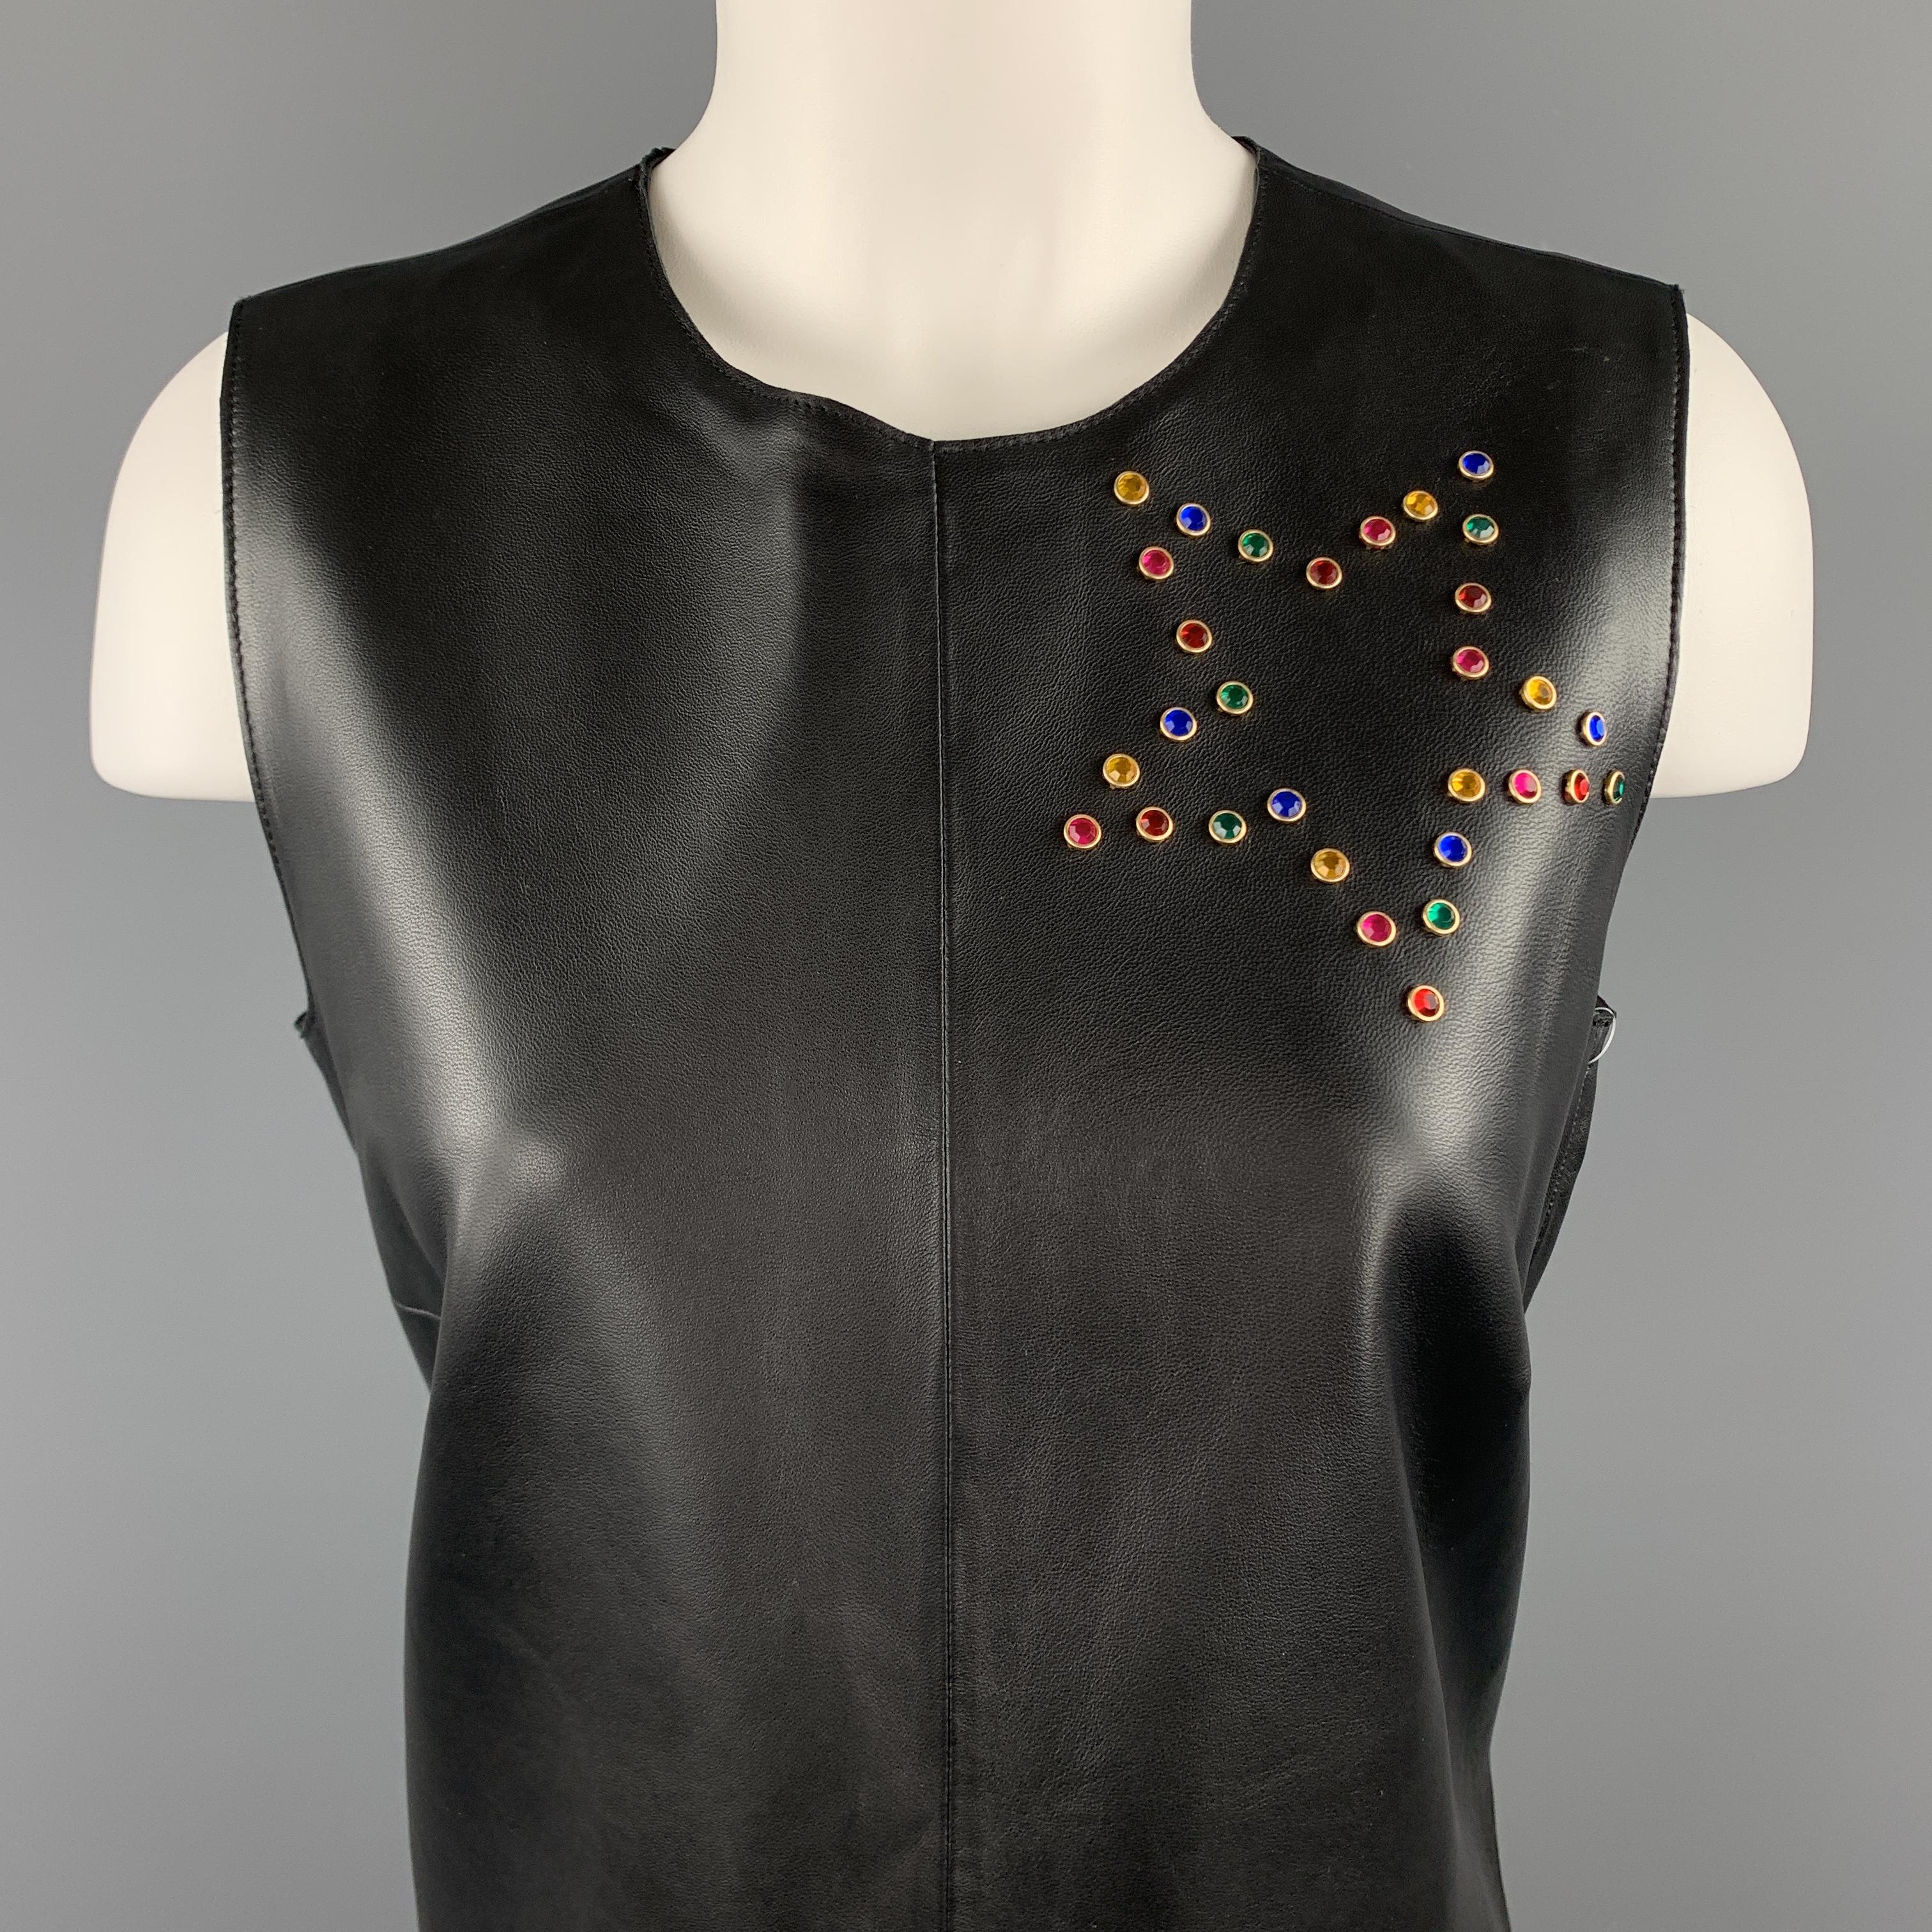 ESCADA SPORT sleeveless shift dress comes in smooth black leather with a round neckline, A line silhouette, and multi color gold tone metal encased gem stone studs in stars throughout. 

New with Tags.
Marked: DE 36

Measurements:

Shoulder: 13